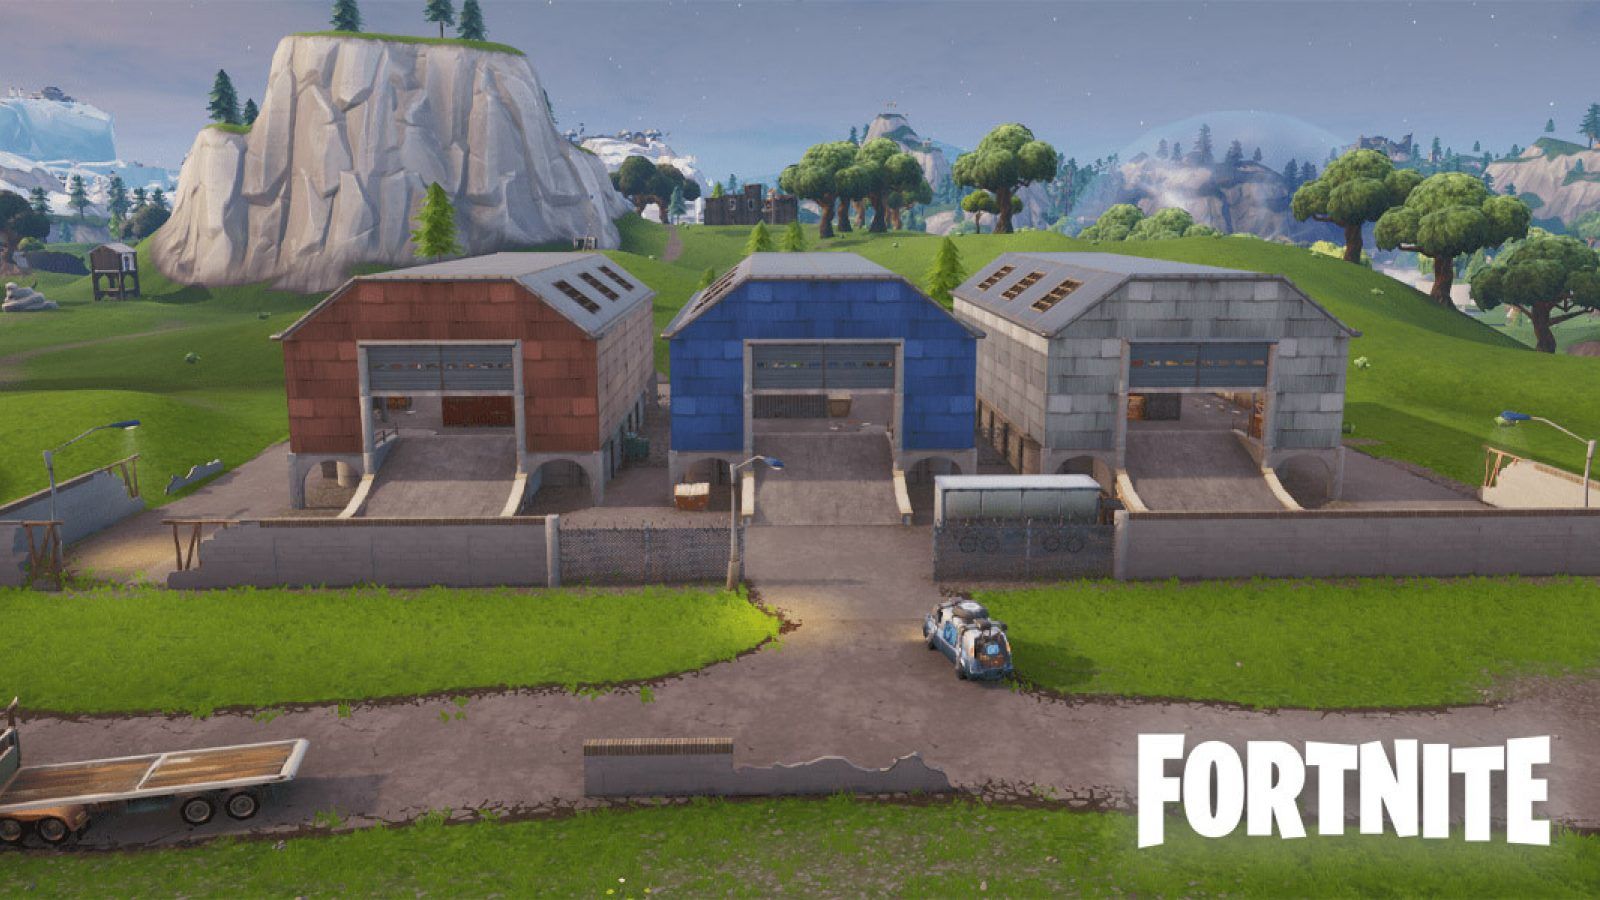 DUSTY DEPOT - Will we return to this iconic location in Season 5?